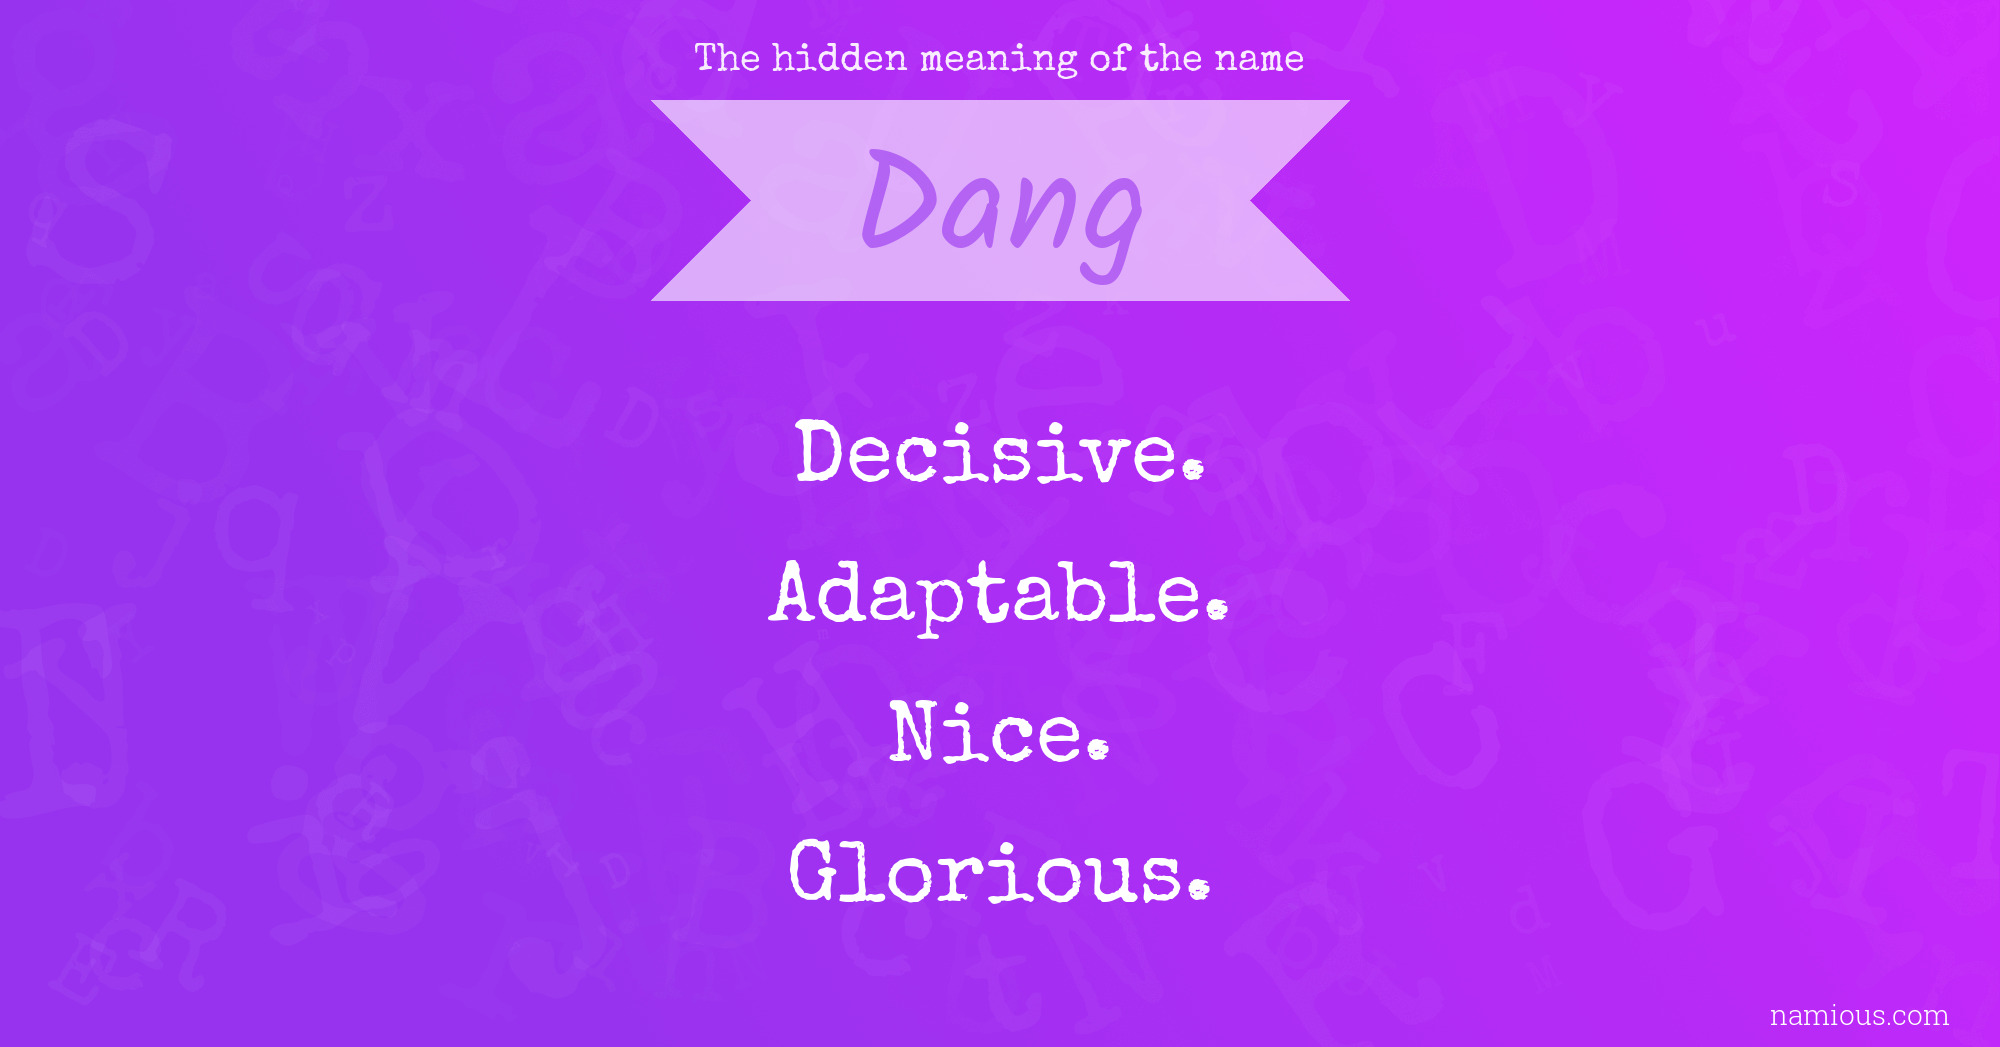 The hidden meaning of the name Dang